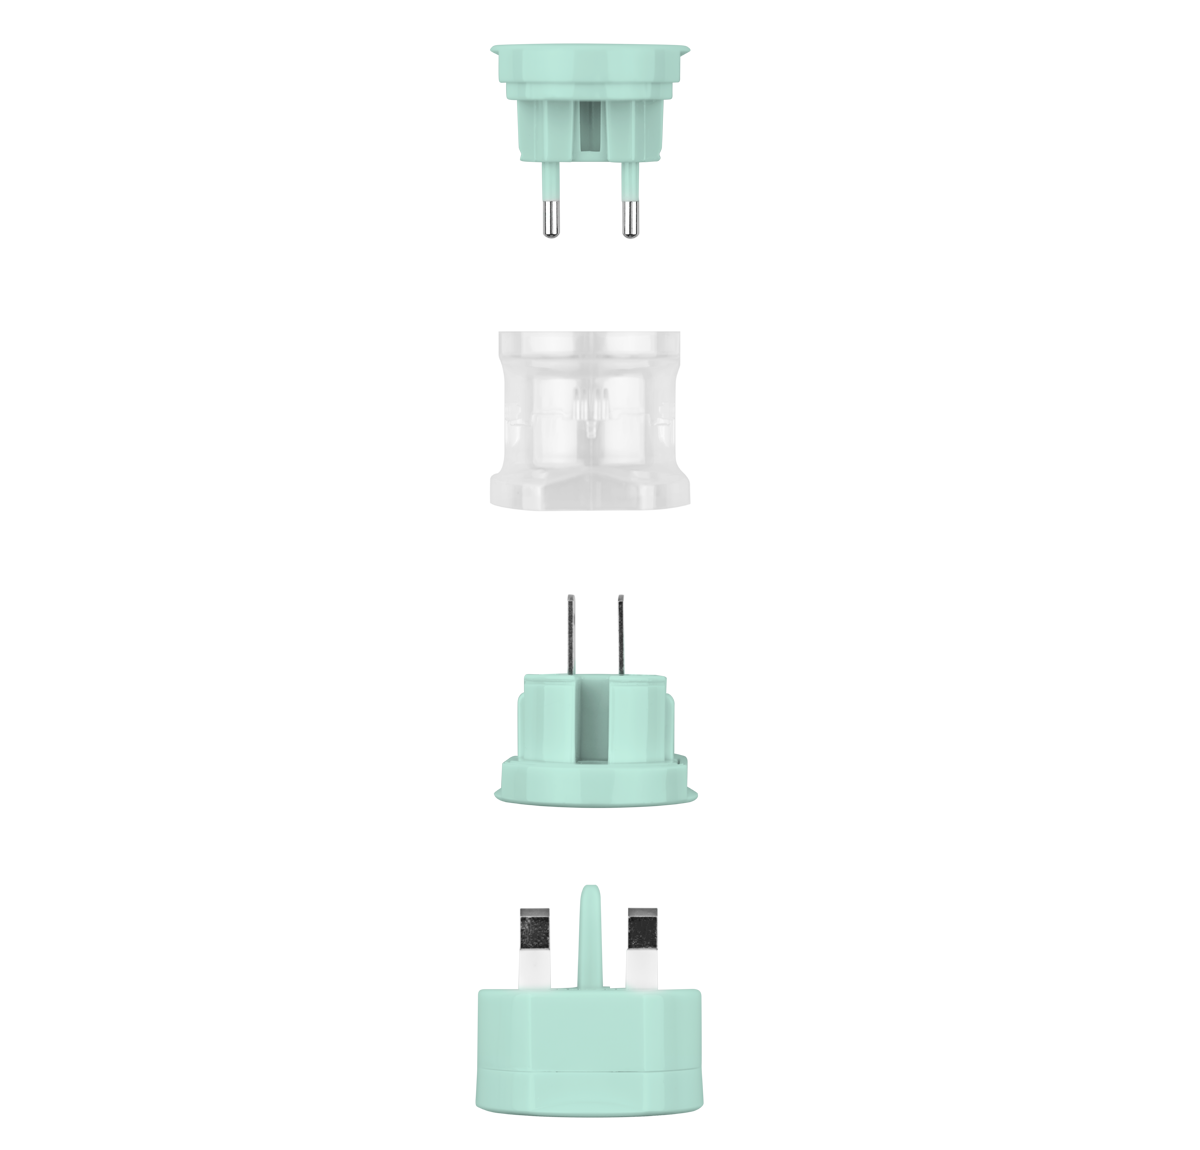 This is a Mint green travel adapter. This universal travel adapter features 3 individual power adapters for the US/Australia, Europe and Asia. This universal adapter clip together for easy transportation when traveling.